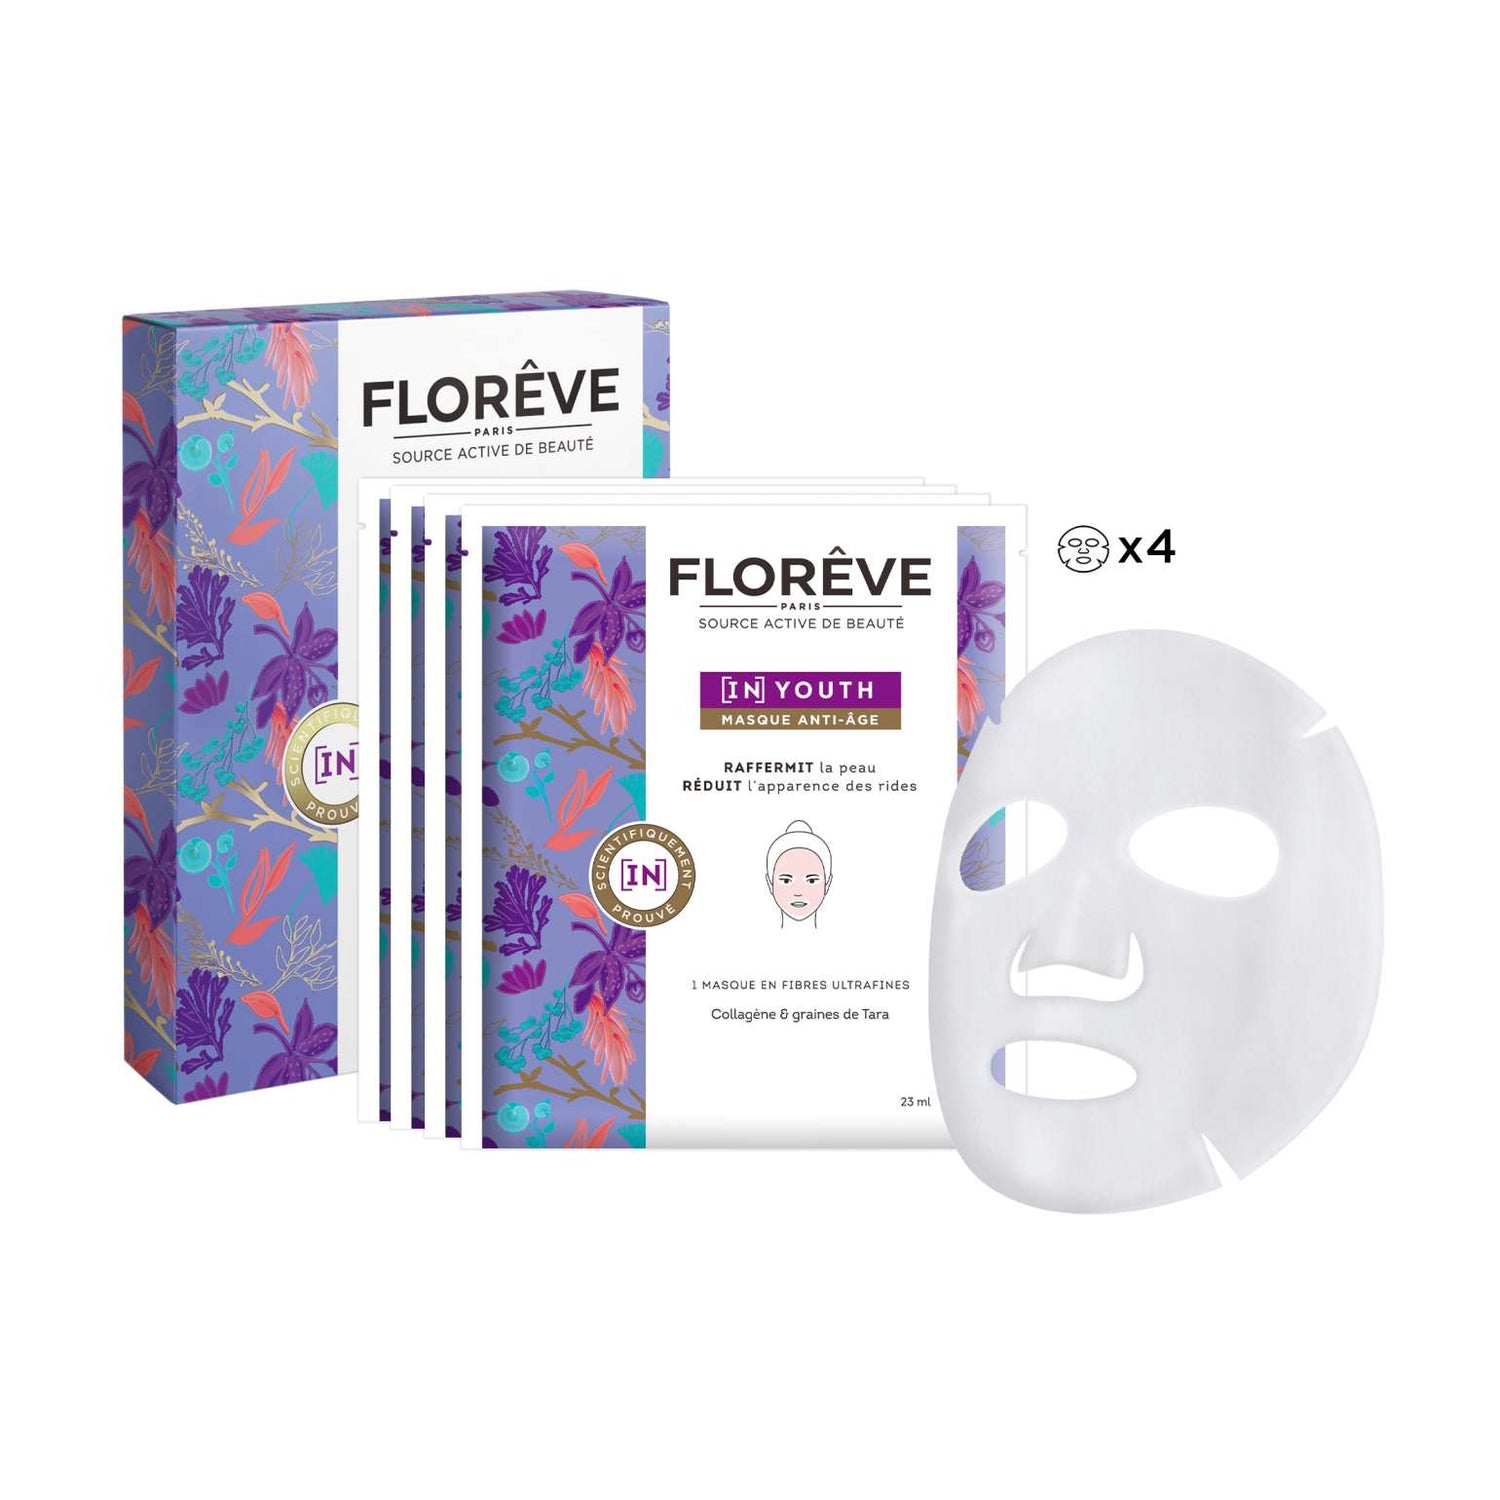 4 [IN] YOUTH Anti-Aging Masks 